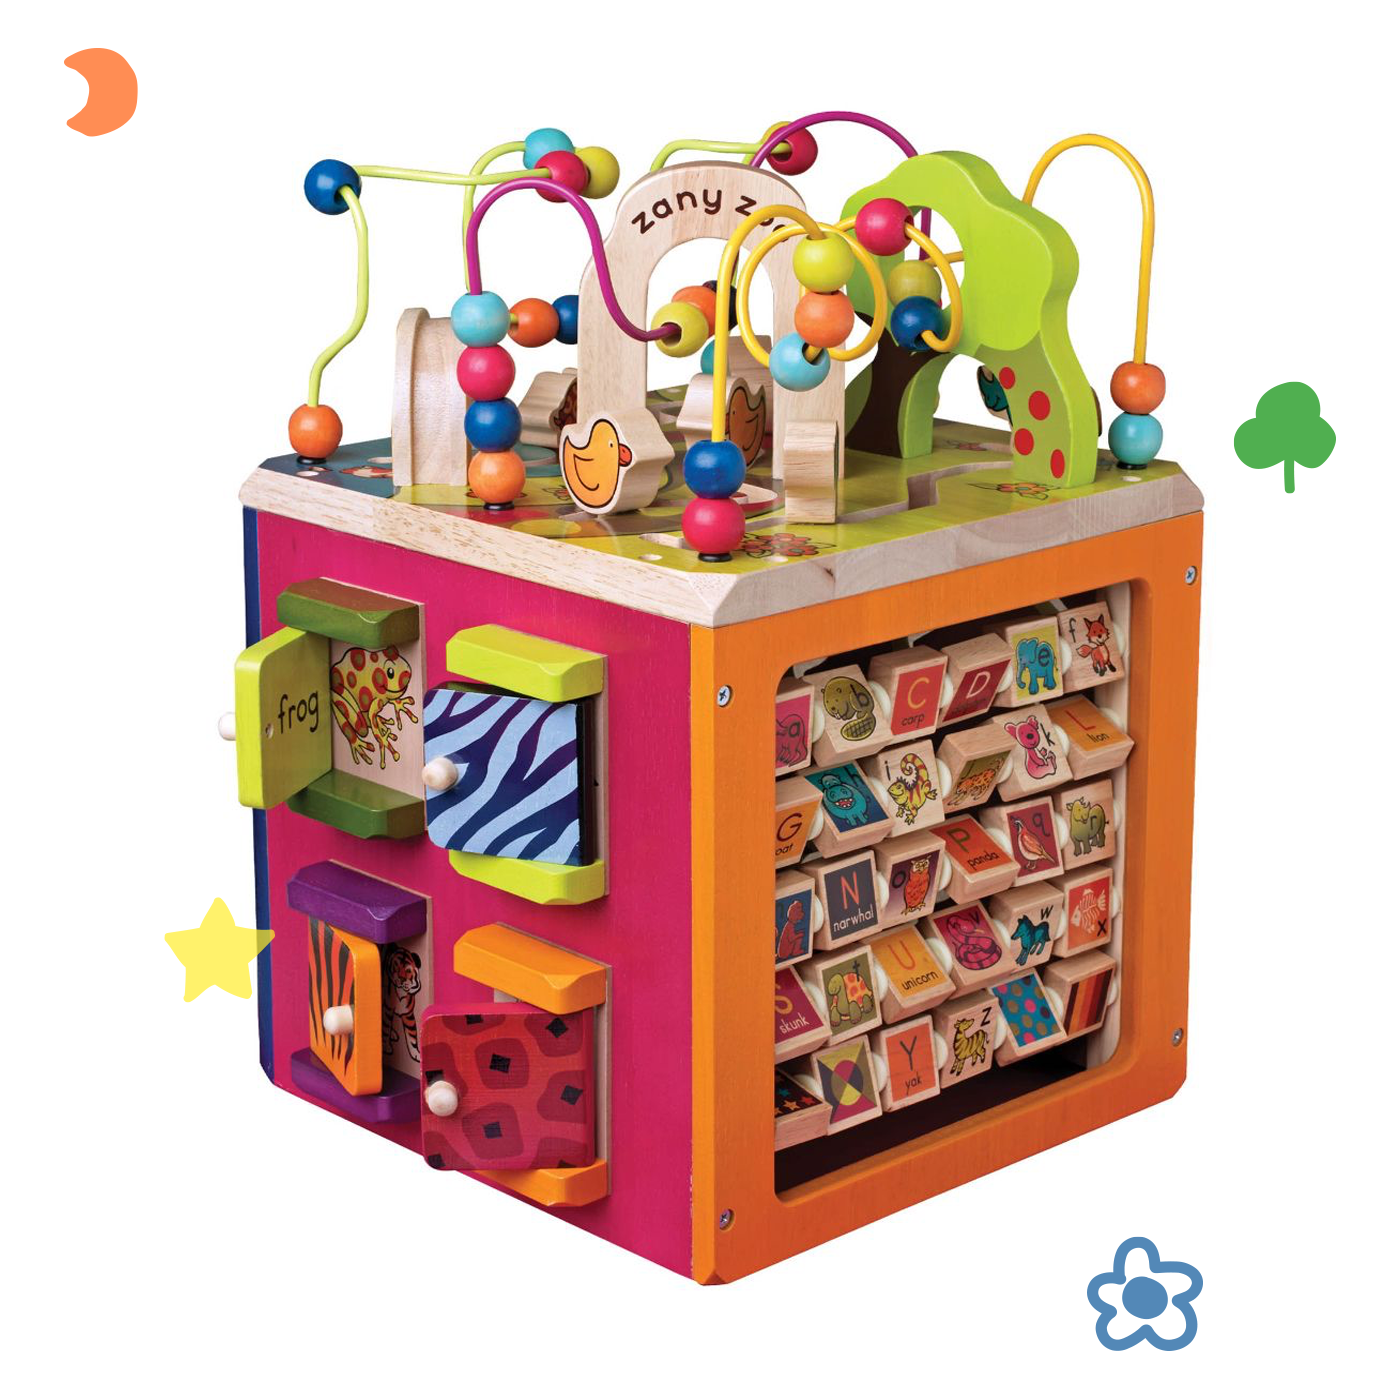 Zany Zoo Wooden Activity Cube, toy box club, wooden activity cube, spinners, 5 sides of fun, bright and colourful